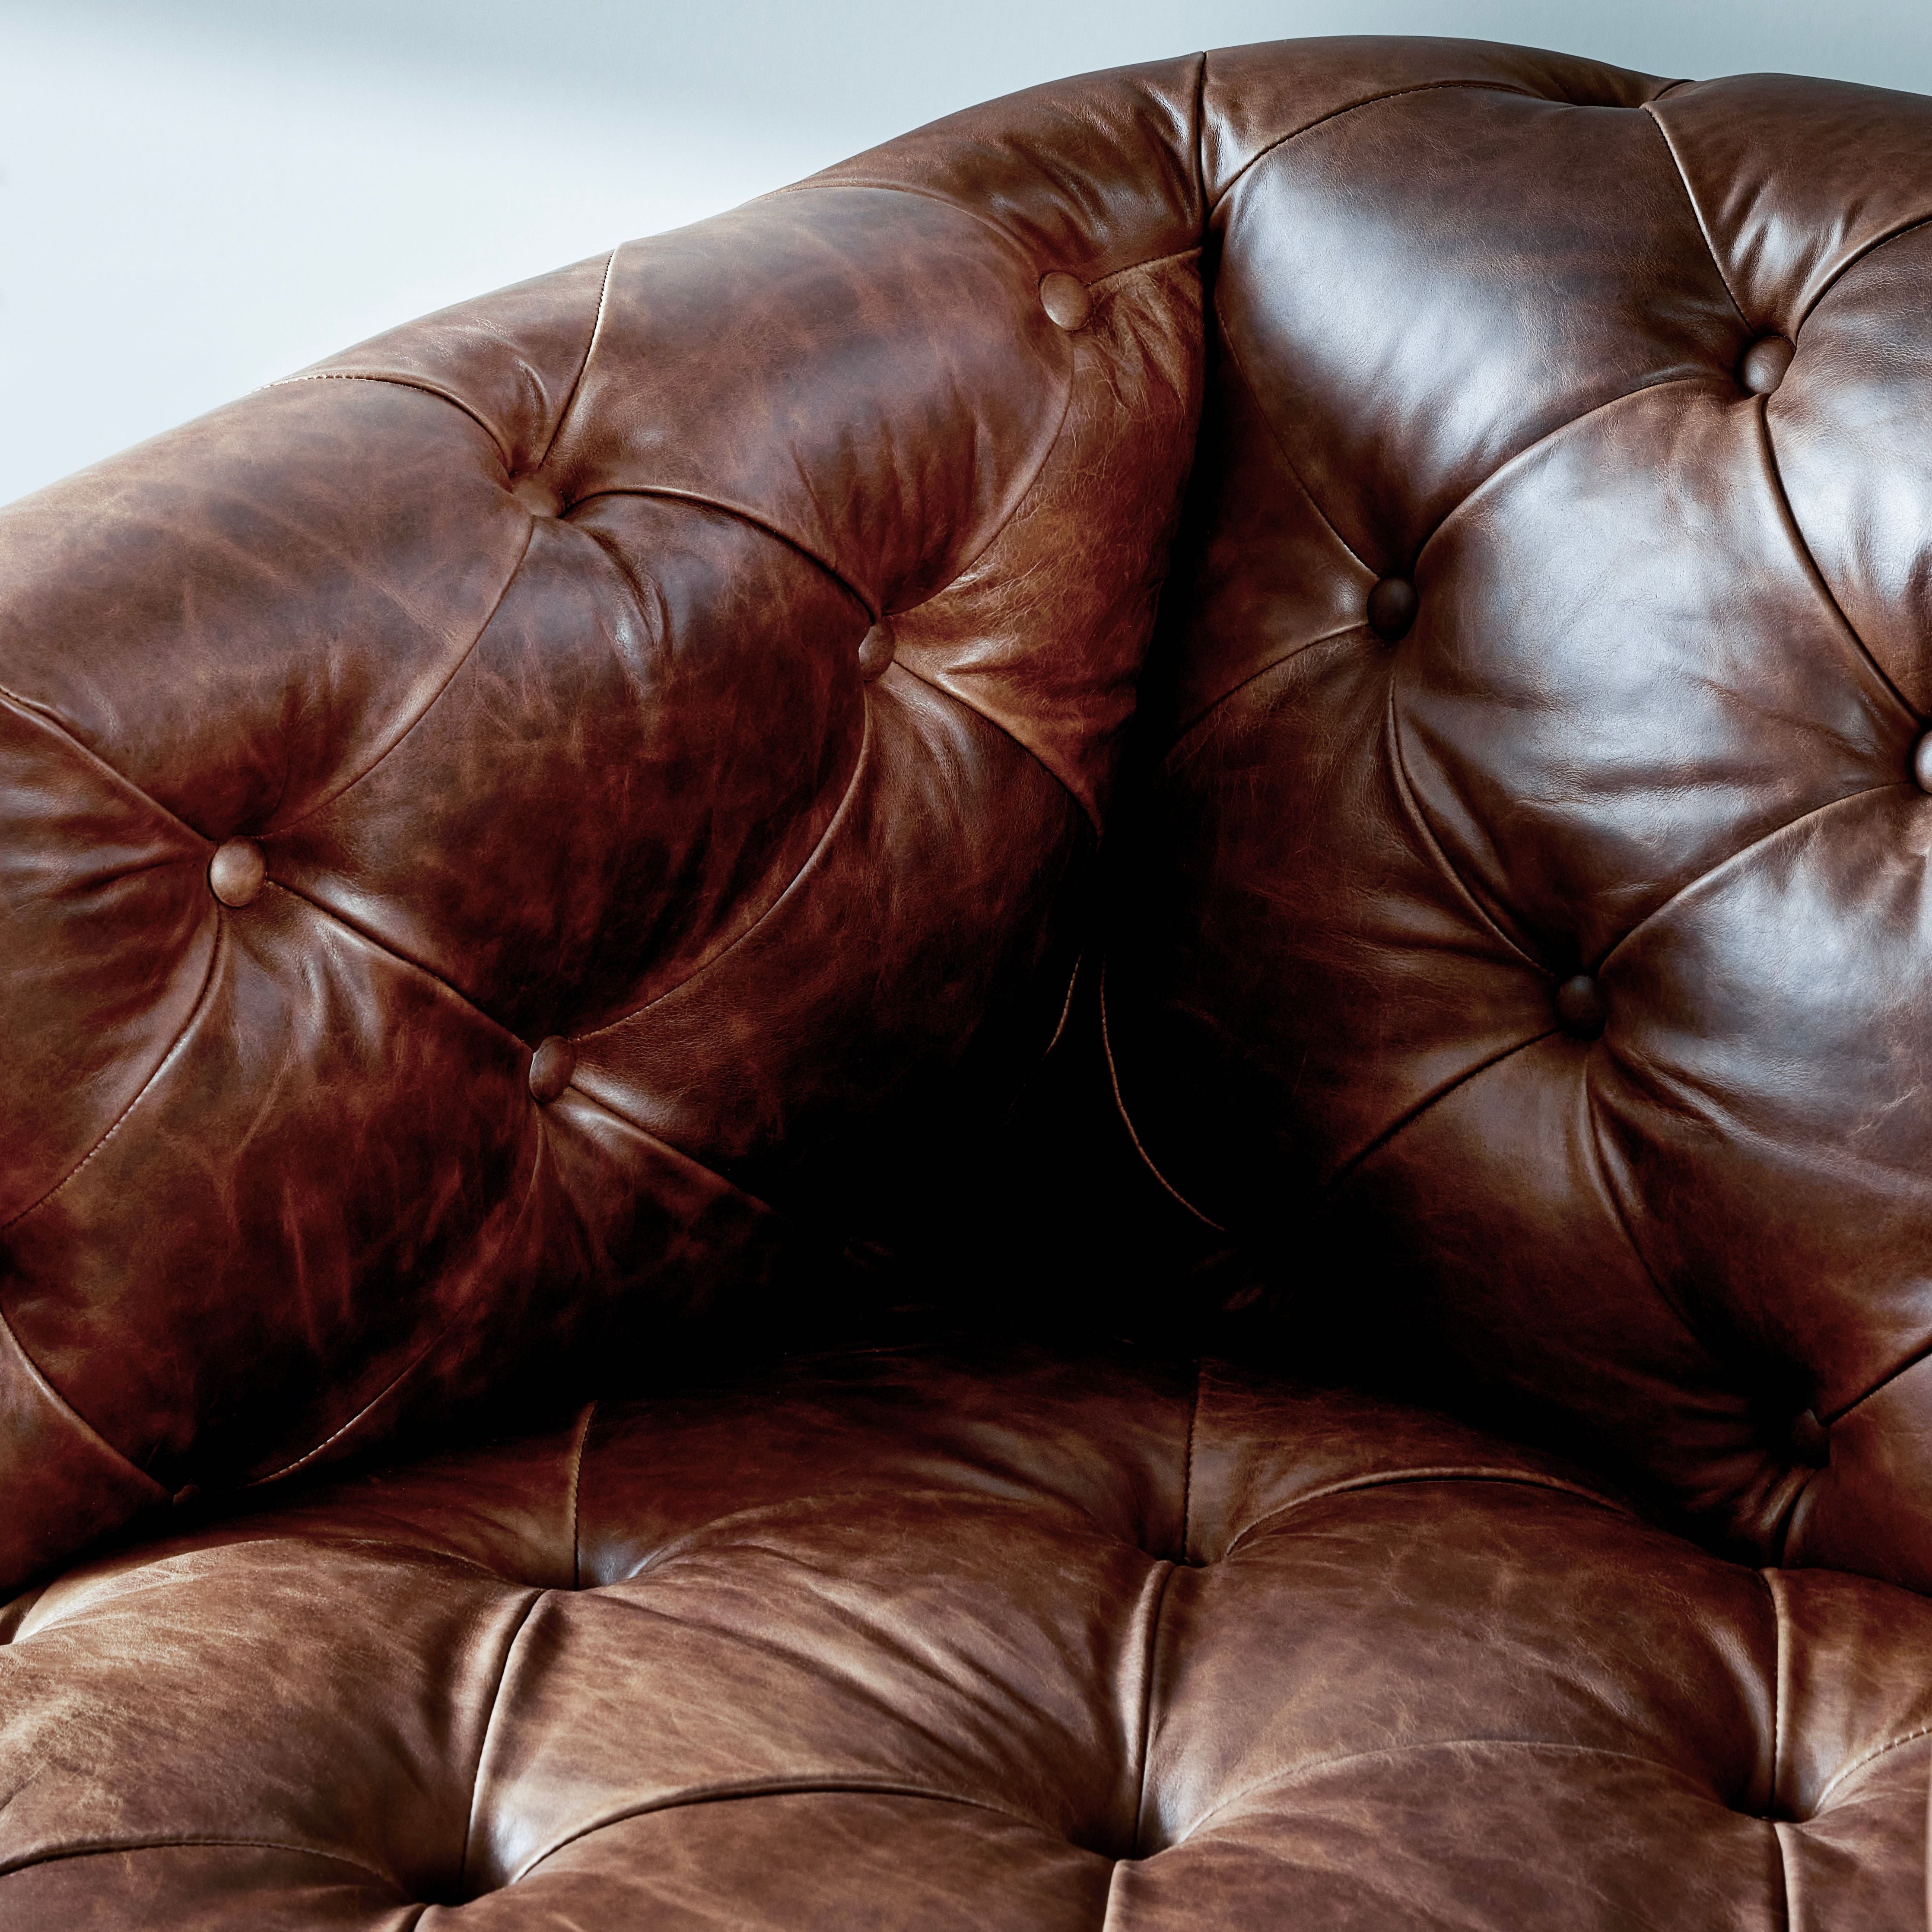 Old English-inspired top-grain leather is finished with a soft hand for a vintage, lived-in look on this traditionally inspired chair. Handcrafted in Italy, the richness of this distinctive, full-bodied leather develops an even-richer patina over time. Button tufting texturizes a comfortably curved back and sides, while a 360-degree swivel modernizes the whole look. Amethyst Home provides interior design, new construction, custom furniture, and area rugs in the Los Angeles metro area.